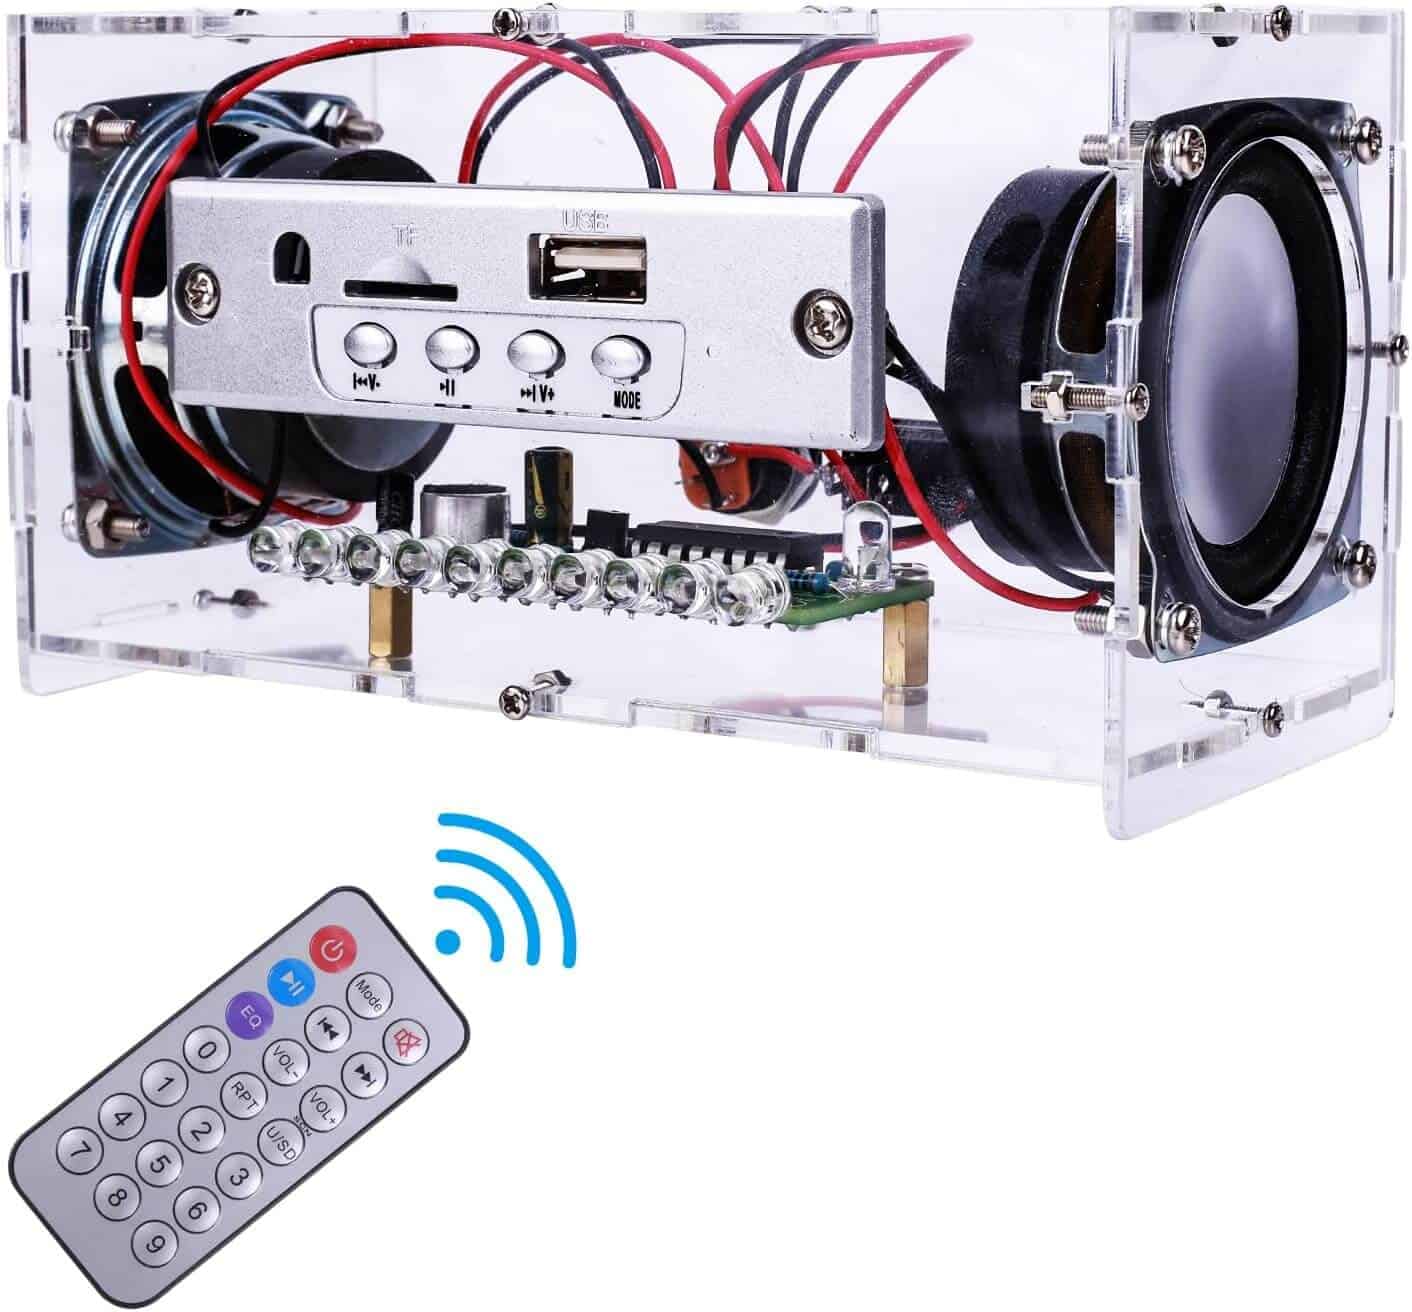 DIY electronics kit that makes a fully functioning speaker with bluetooth and LED lights